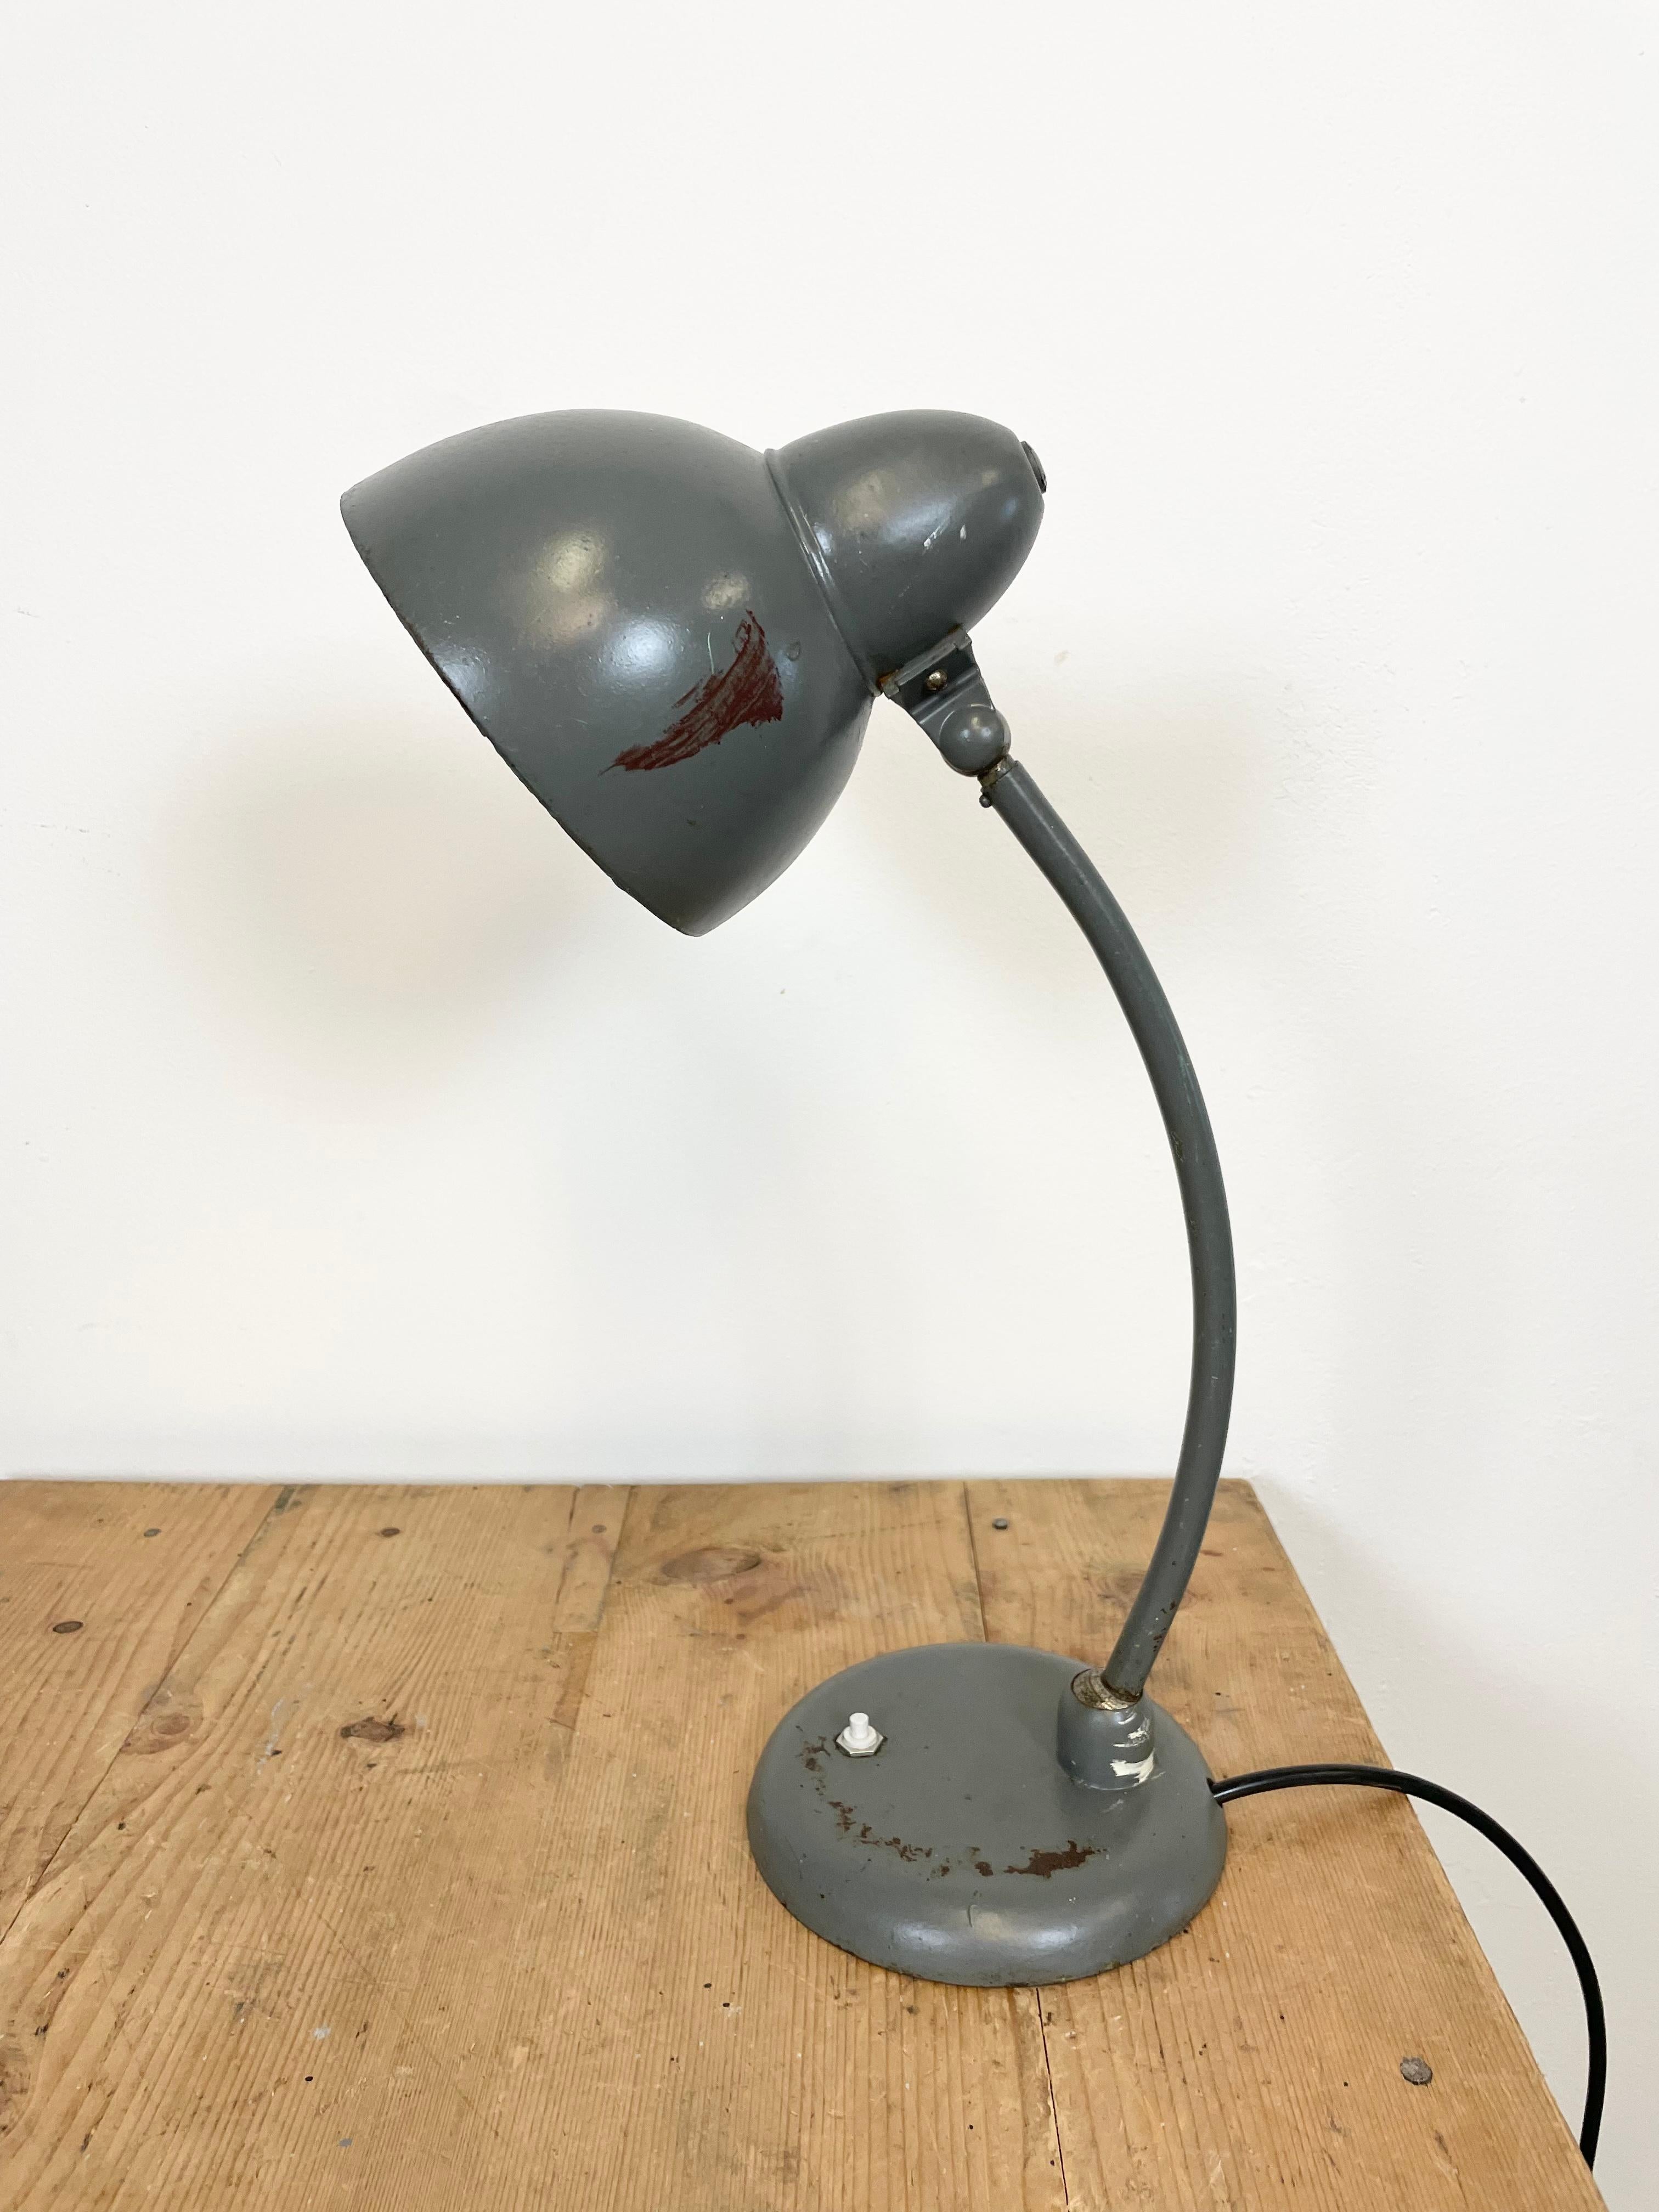 This grey Bauhaus industrial desk lamp was made in former Czechoslovakia during the 1930s. The lamp has grey metal shade, iron base and arm, two adjustable joints, porcelain socket for E 27 lightbulbs and new wire. Fully functional. Lampshade